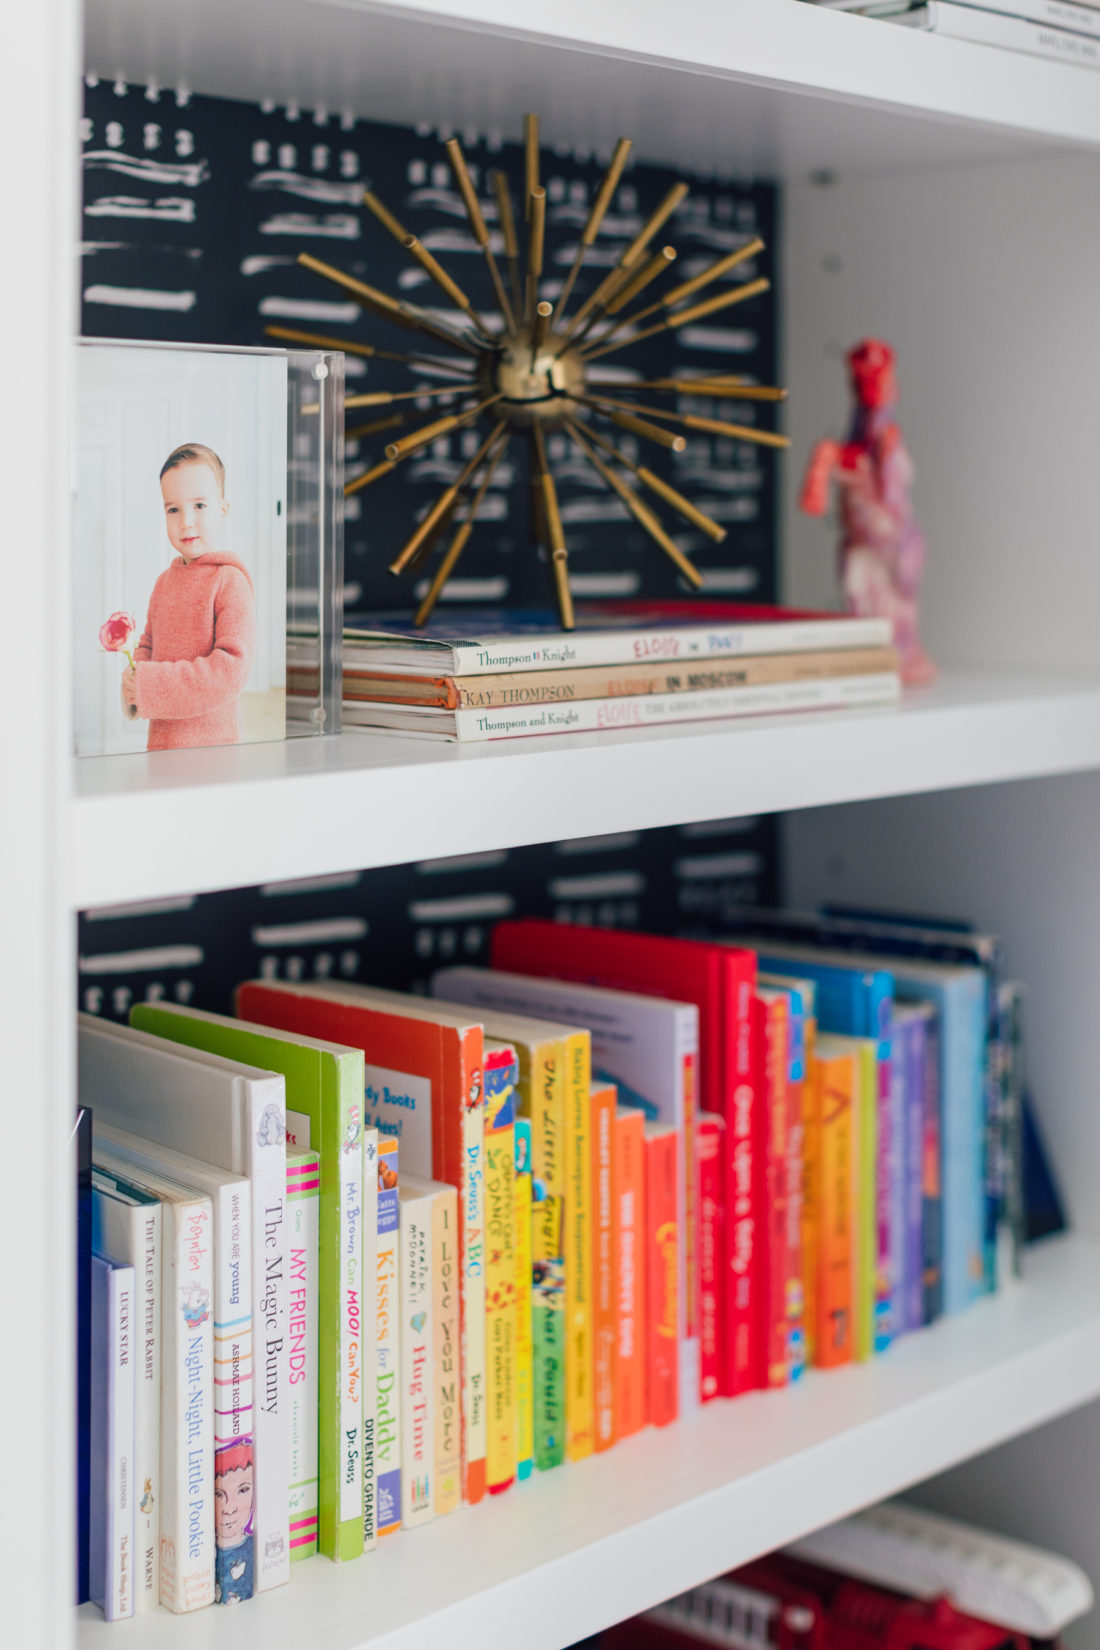 Details on the shelves of the playroom in Eva Amurri Martino's newly renovated Westport CT home